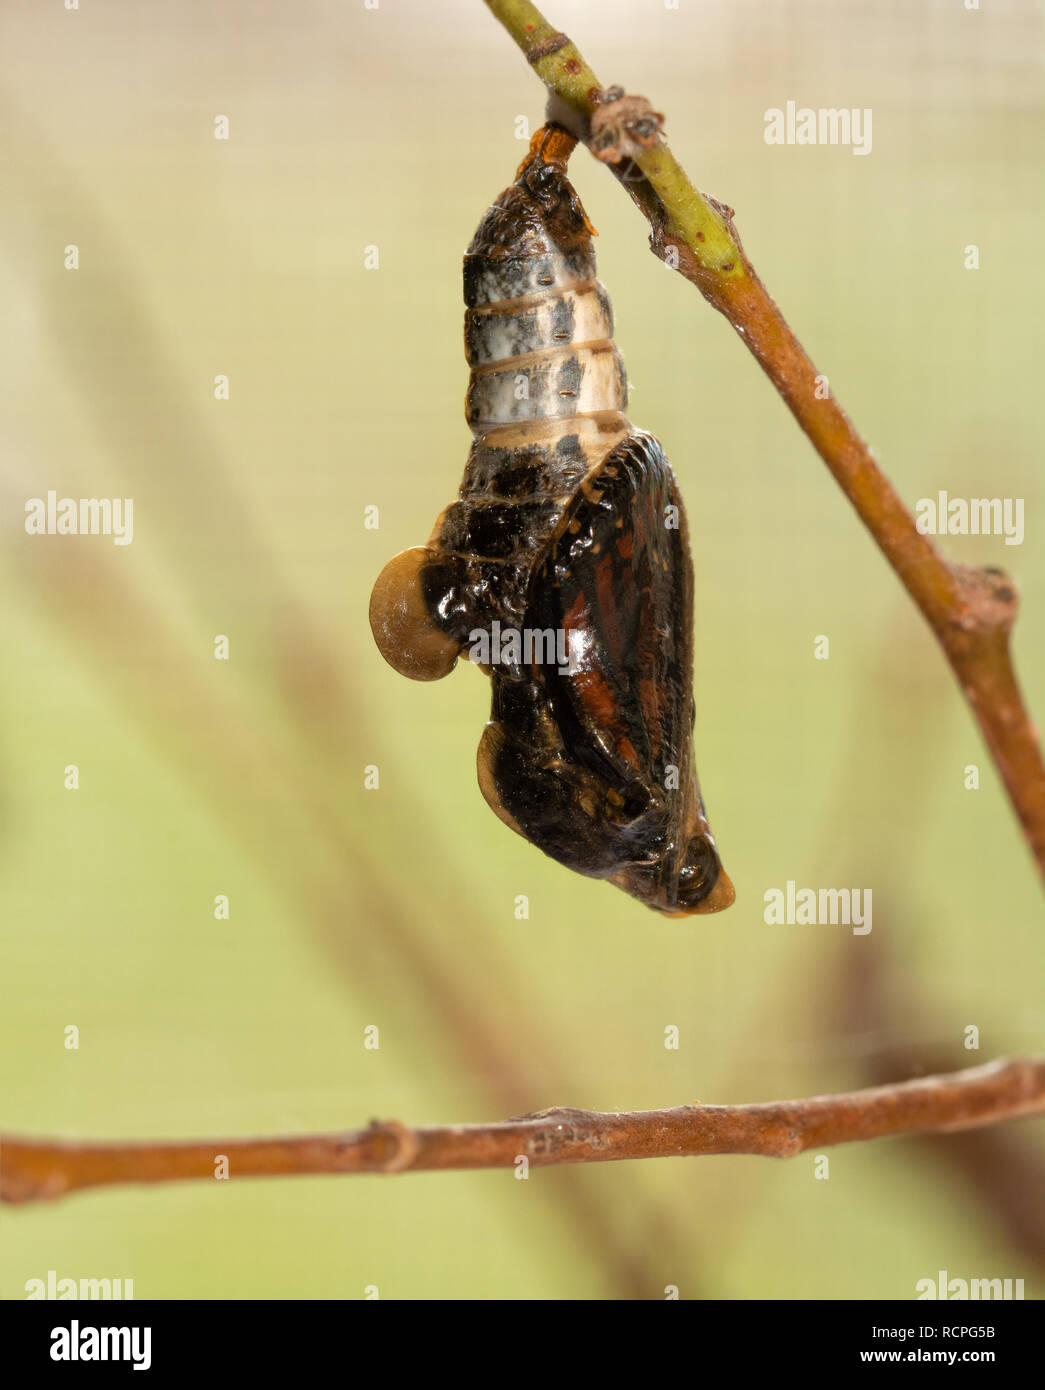 Viceroy butterfly in its chrysalis moments before eclosion, colors of wings visible through the shell Stock Photo